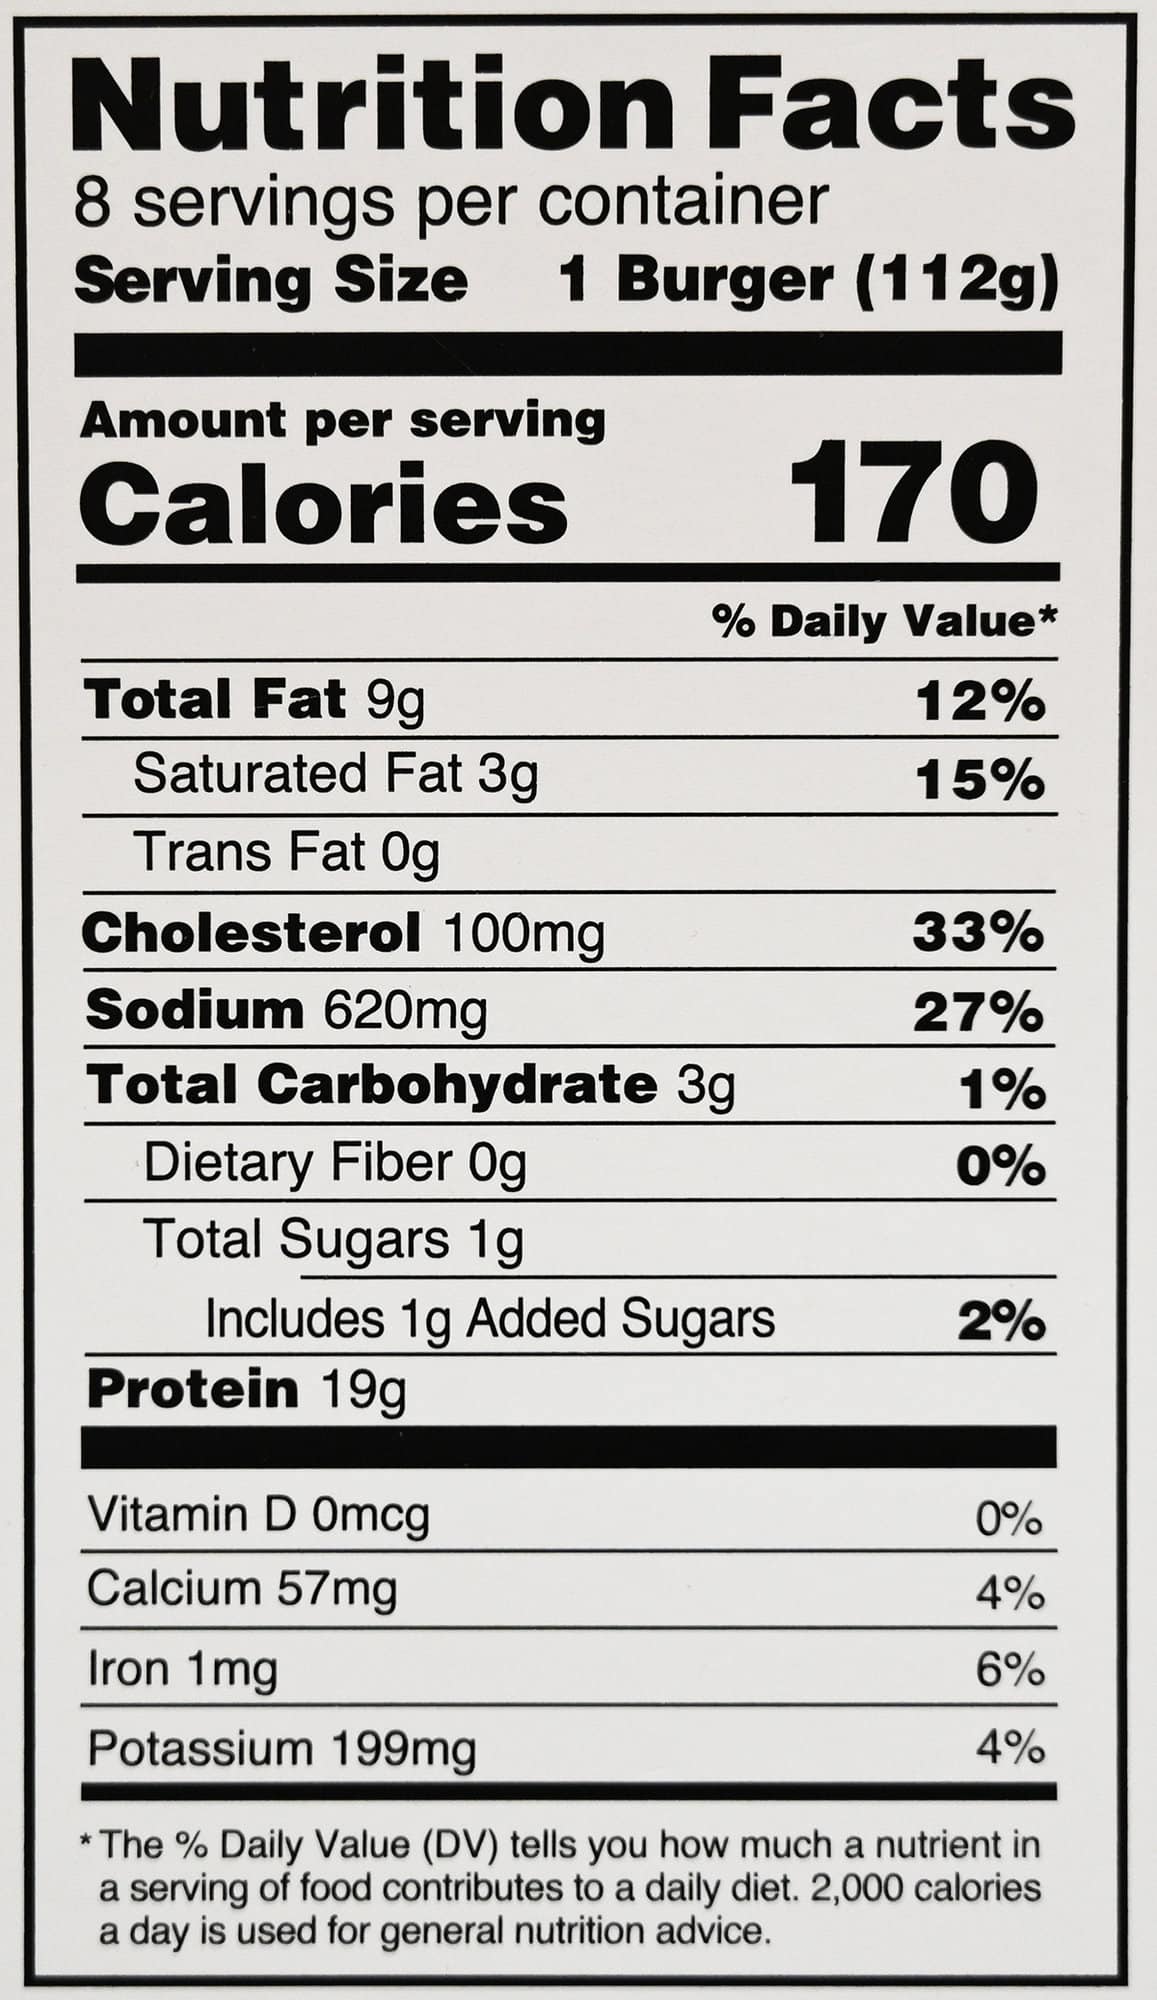 Image of the nutrition facts label for the burgers from the back of the box.